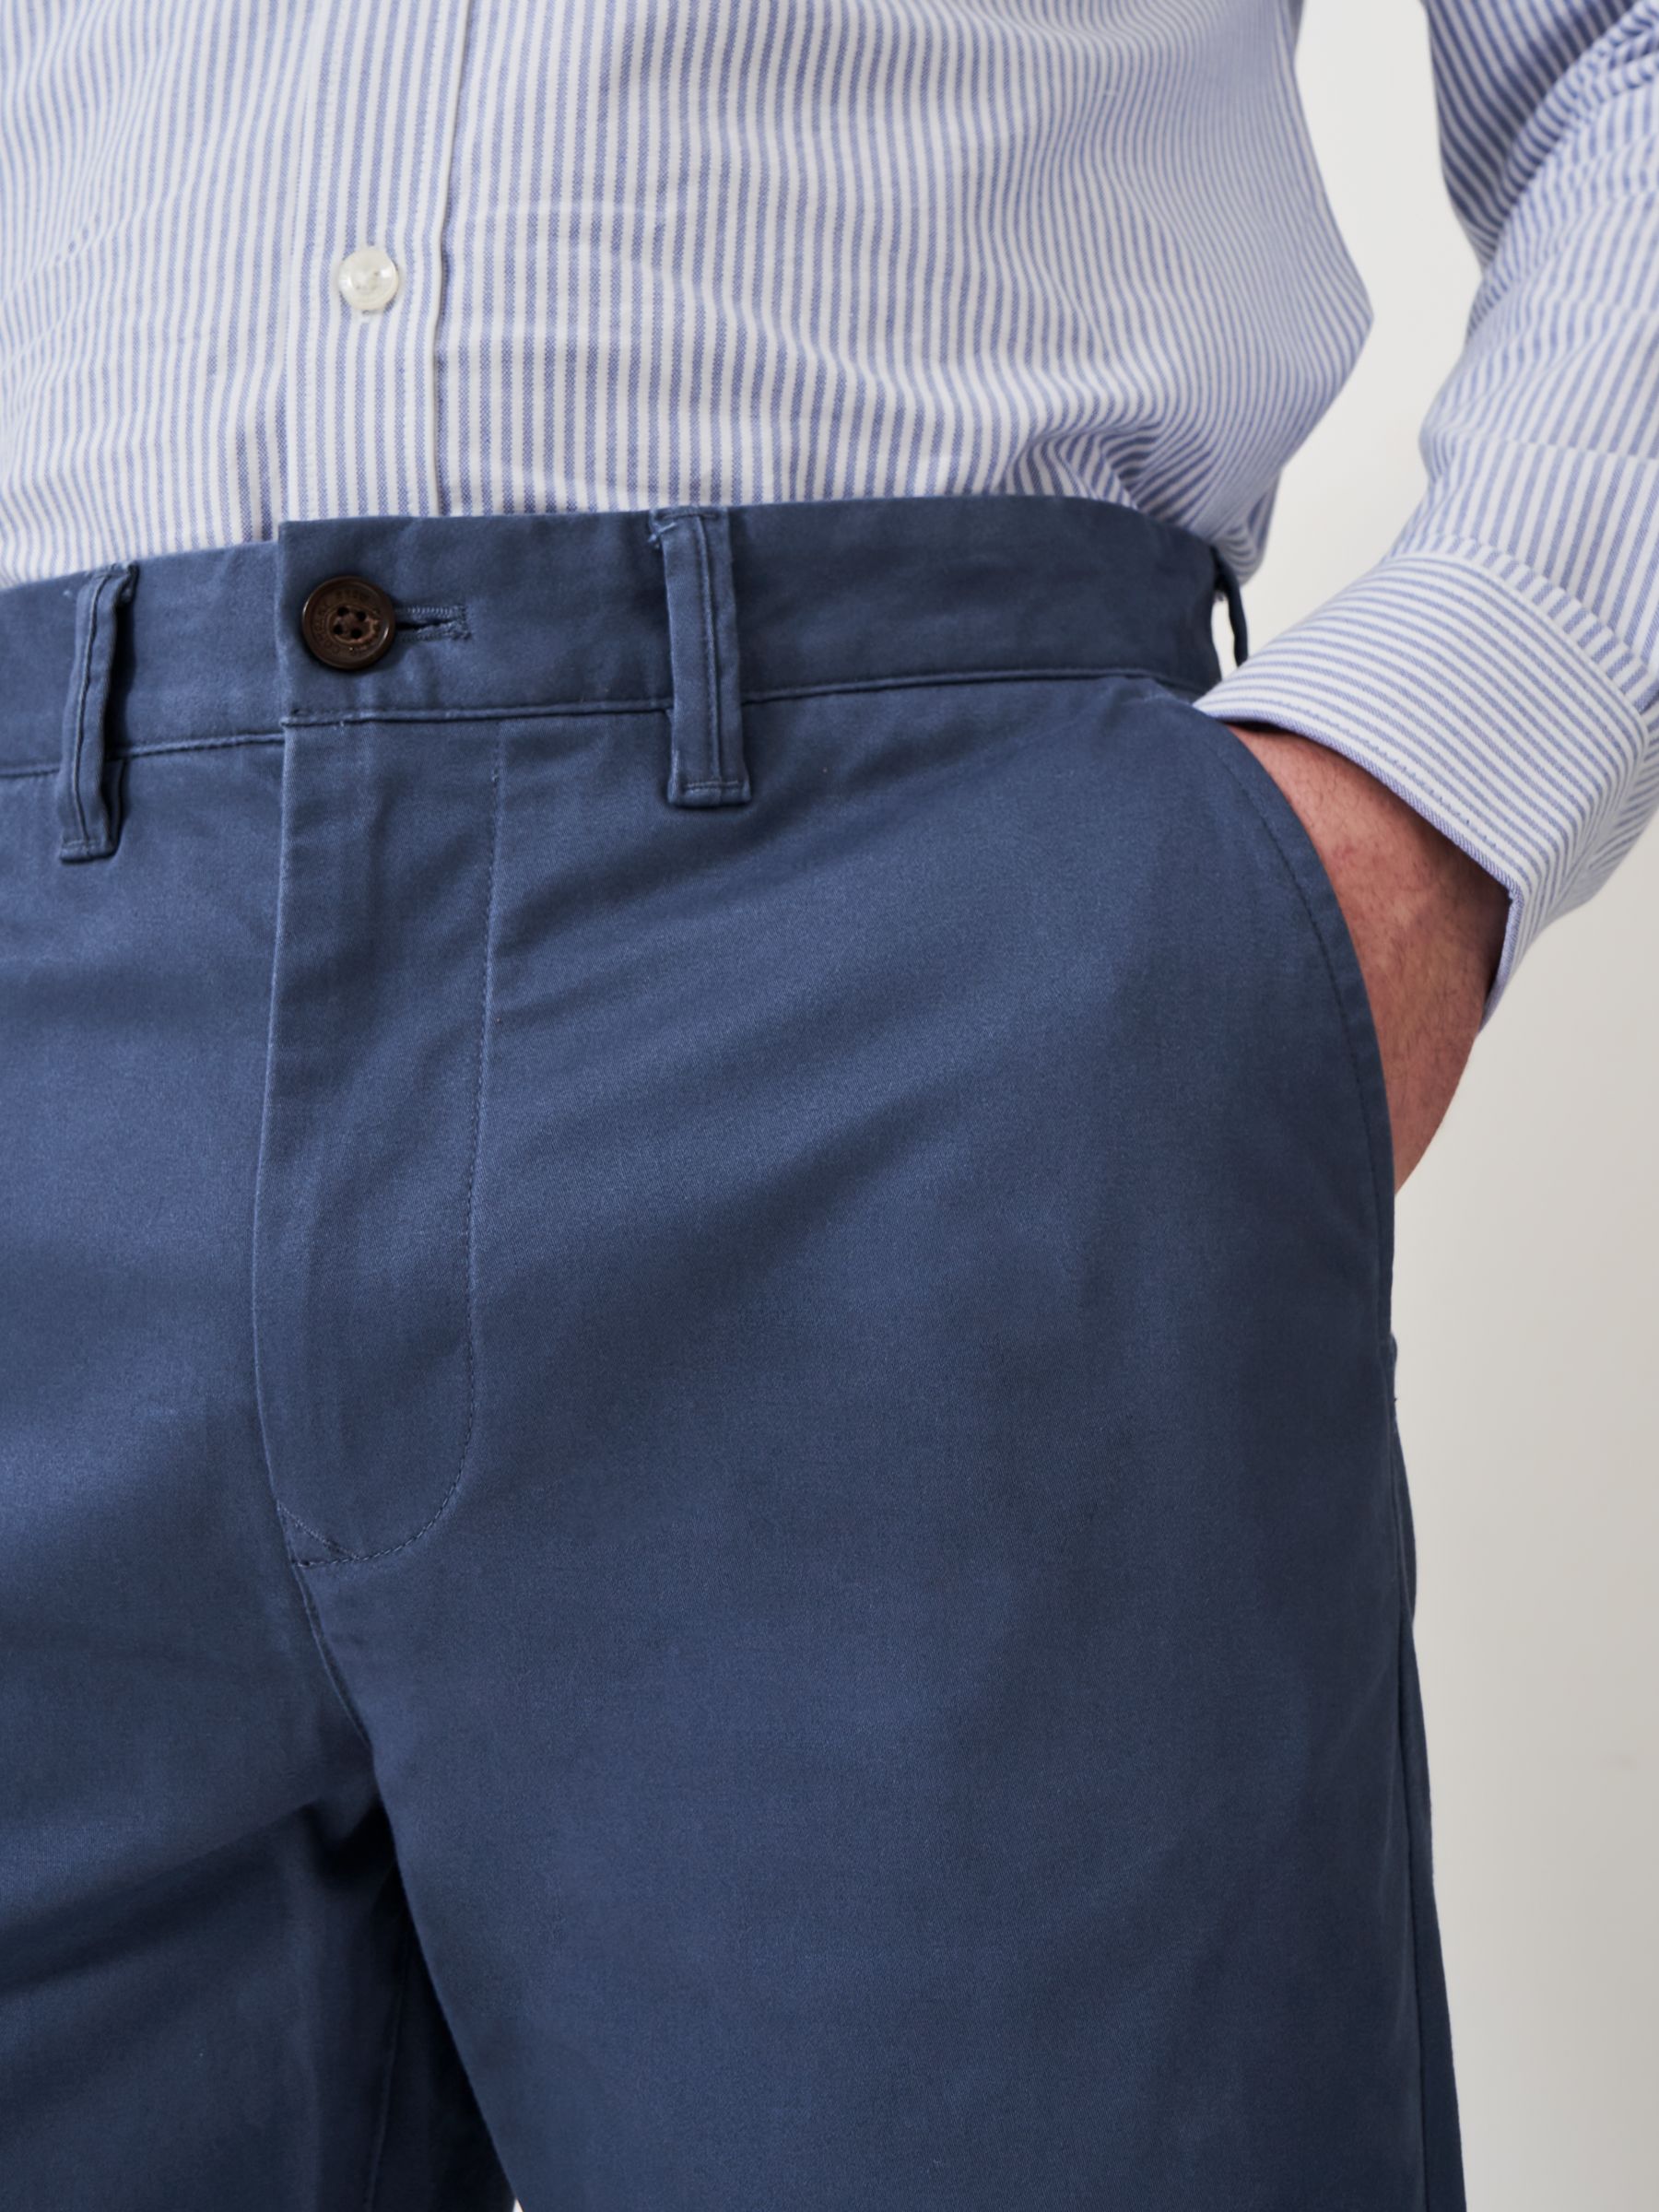 Crew Clothing Slim Fit Chinos, Bright Blue at John Lewis & Partners